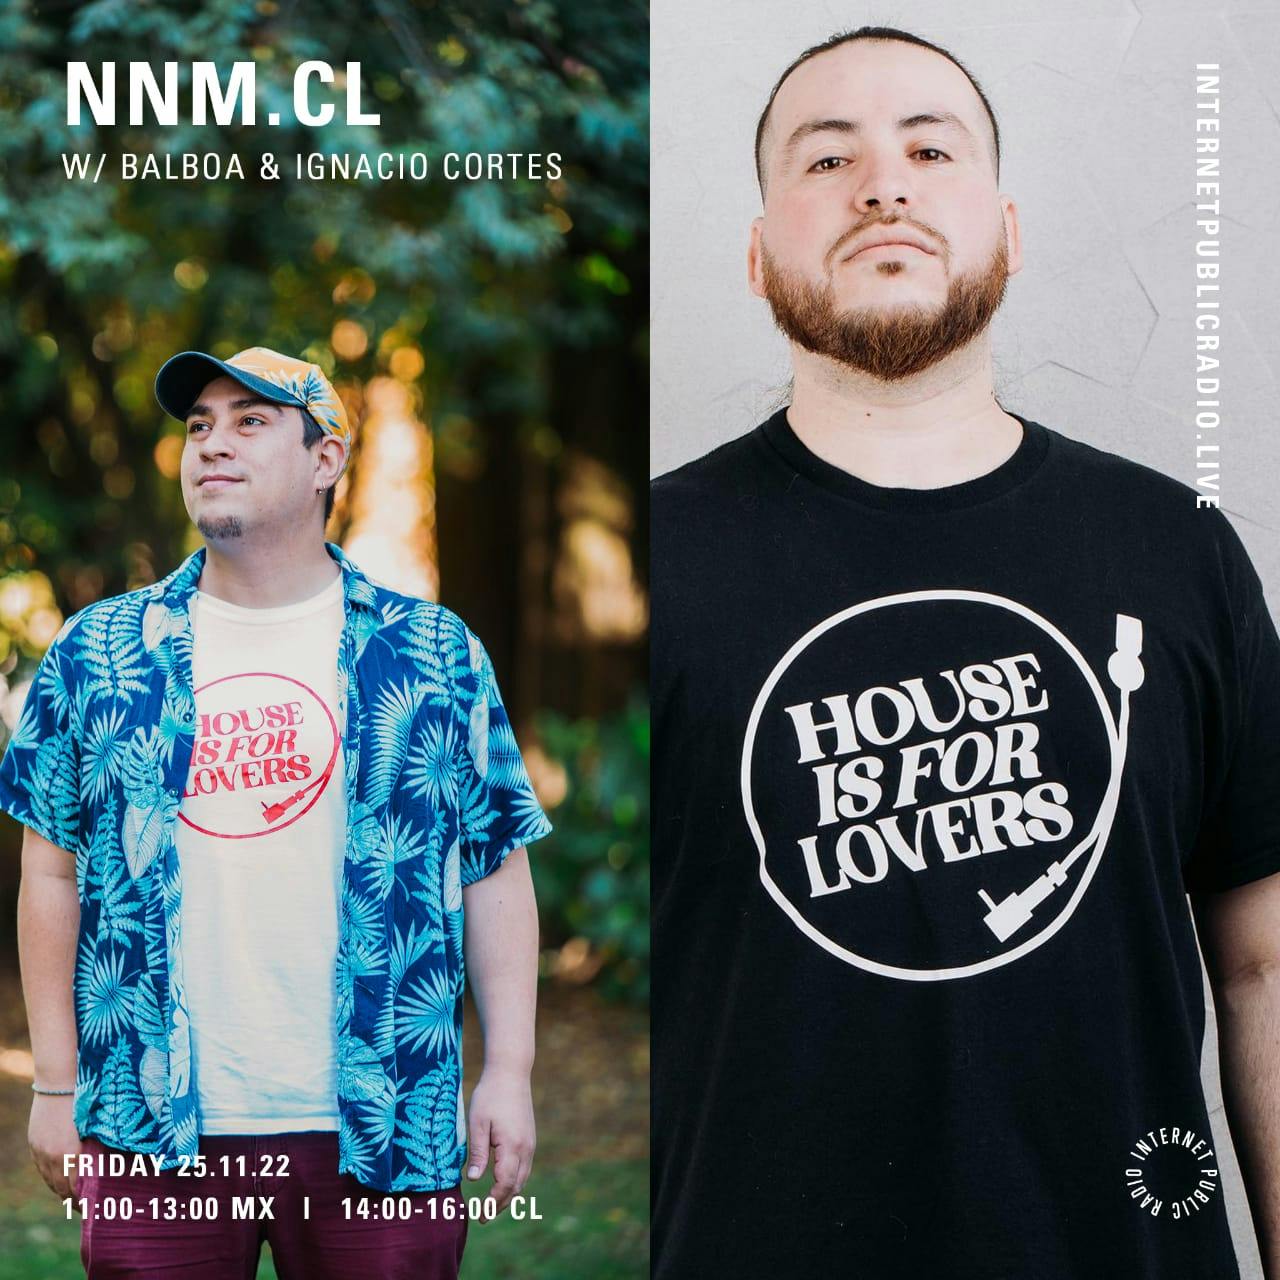 NNM.cl x IPR 035 w/ House is for Lovers